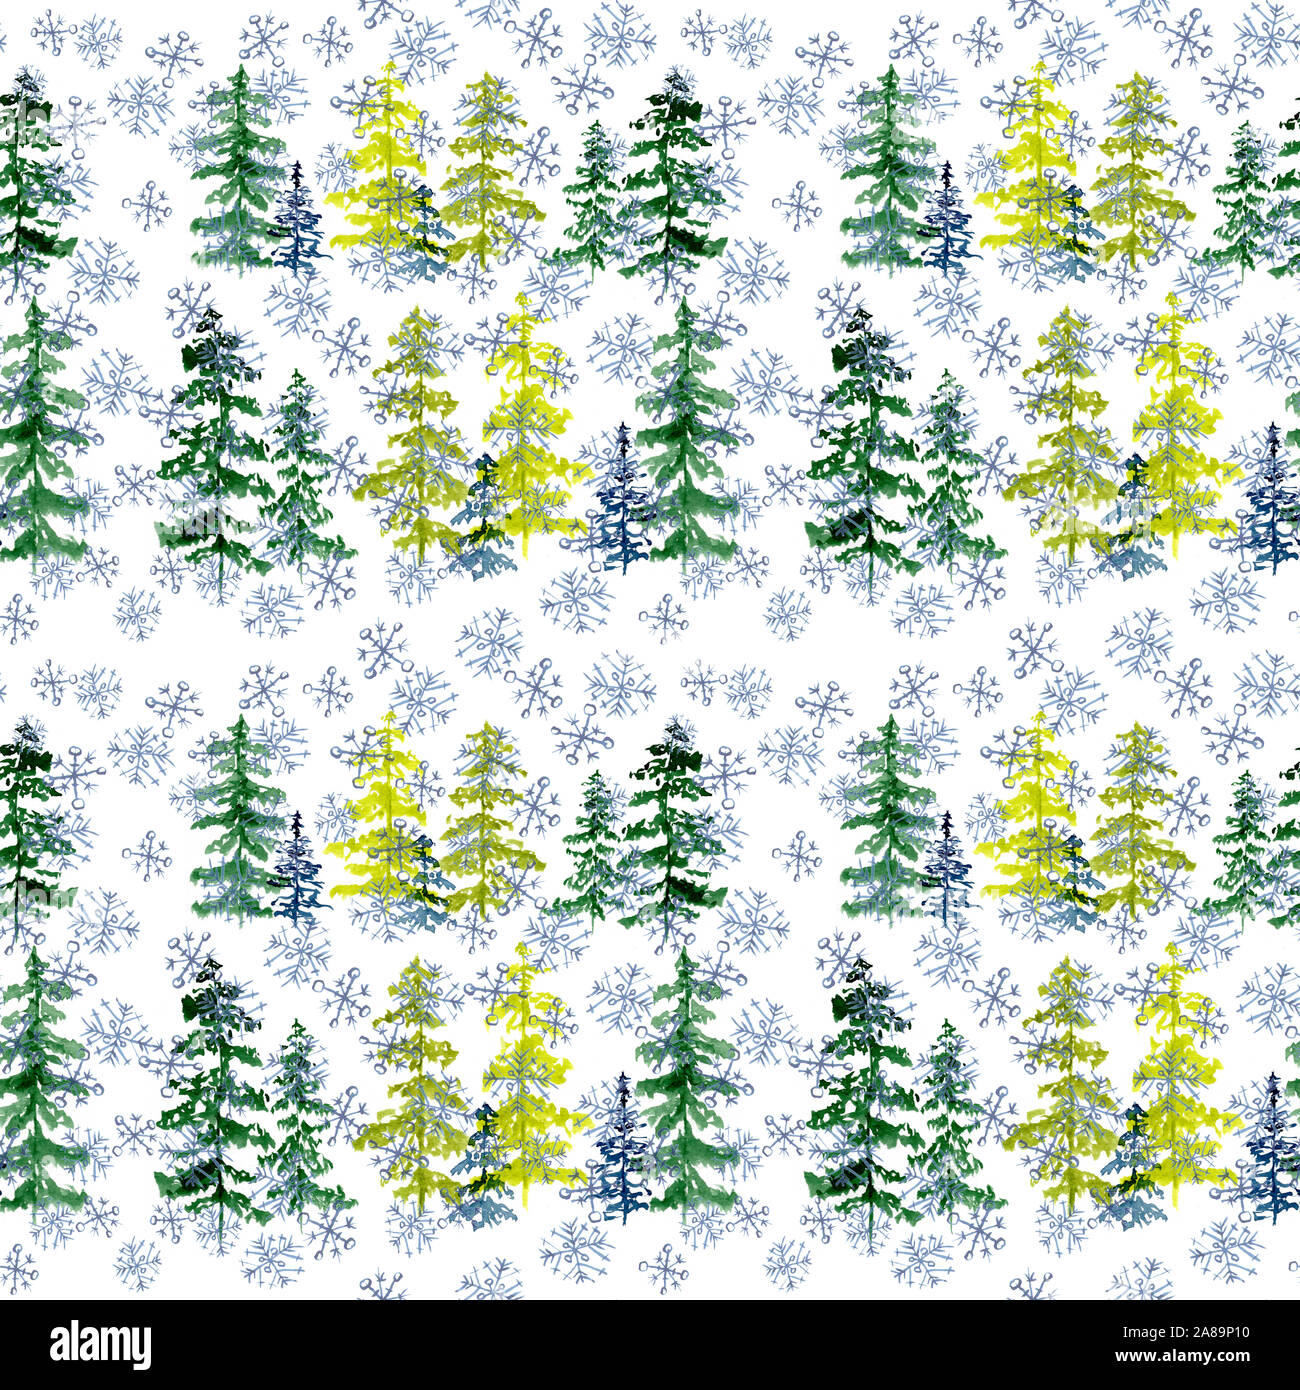 Seamless pattern with watercolor conifer trees and blue snowflakes. To design and decor backgrounds, banners, flyers. Stock Photo